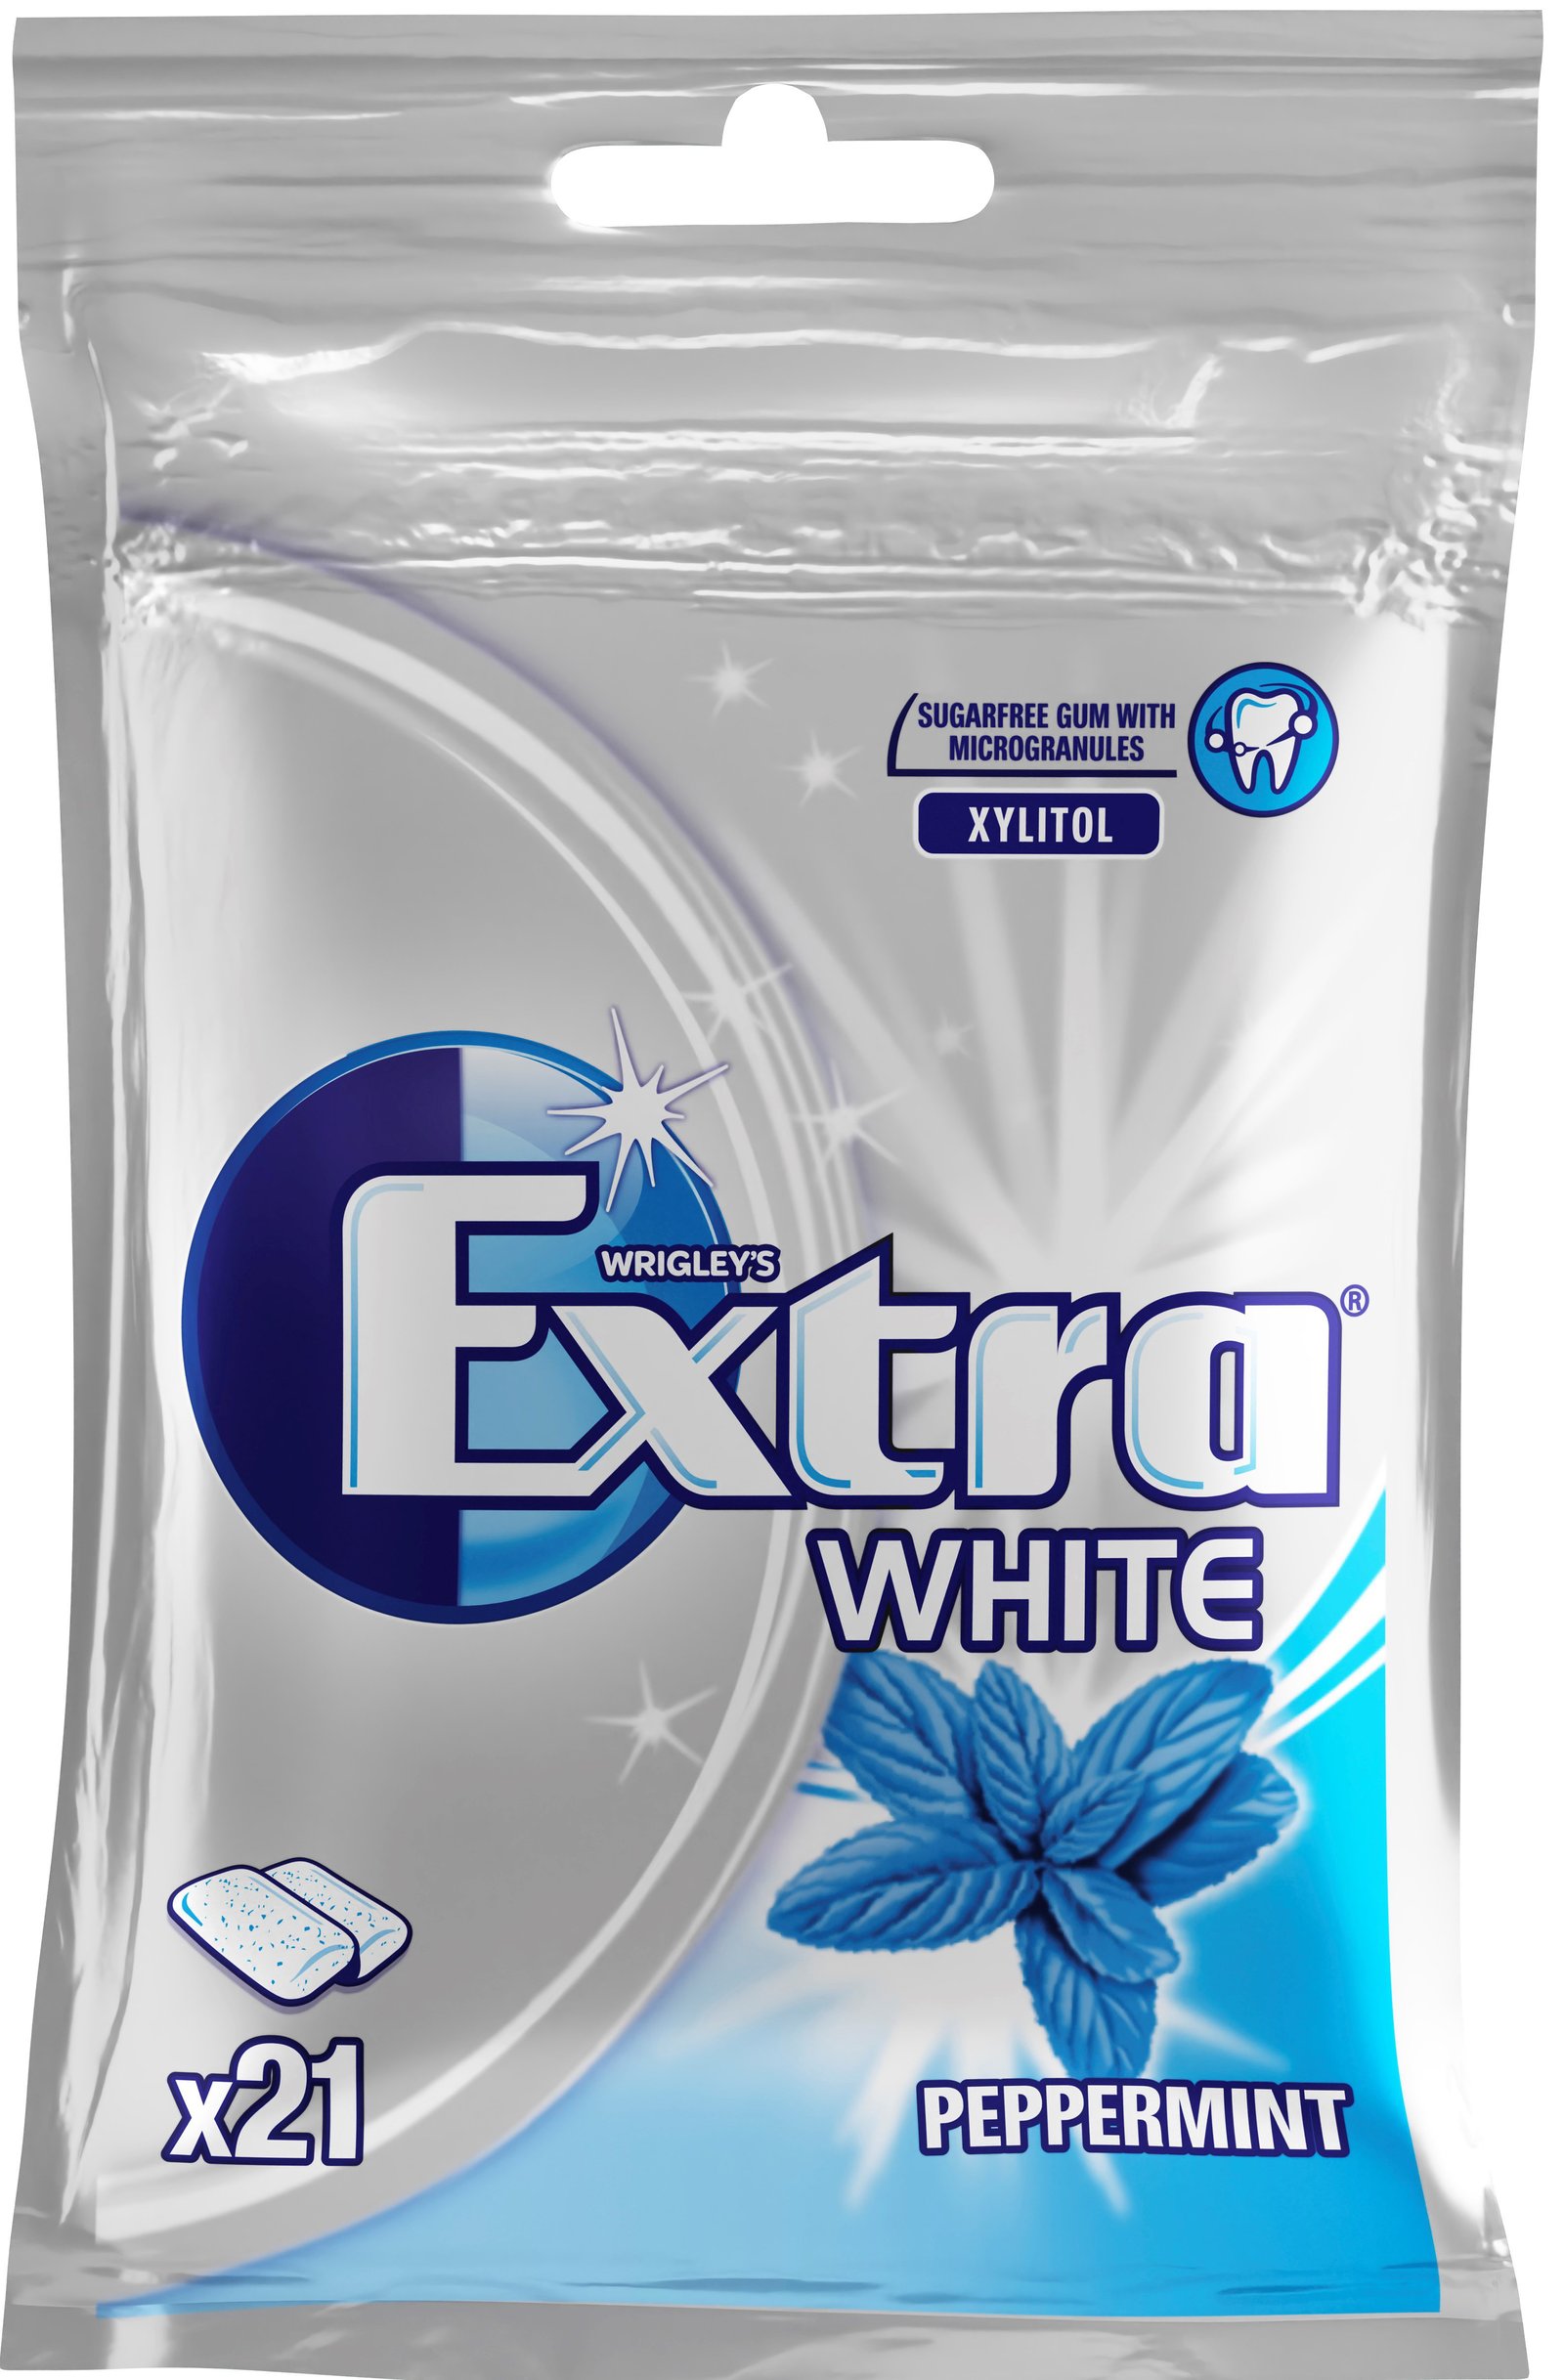 Extra White Peppermint 21 st